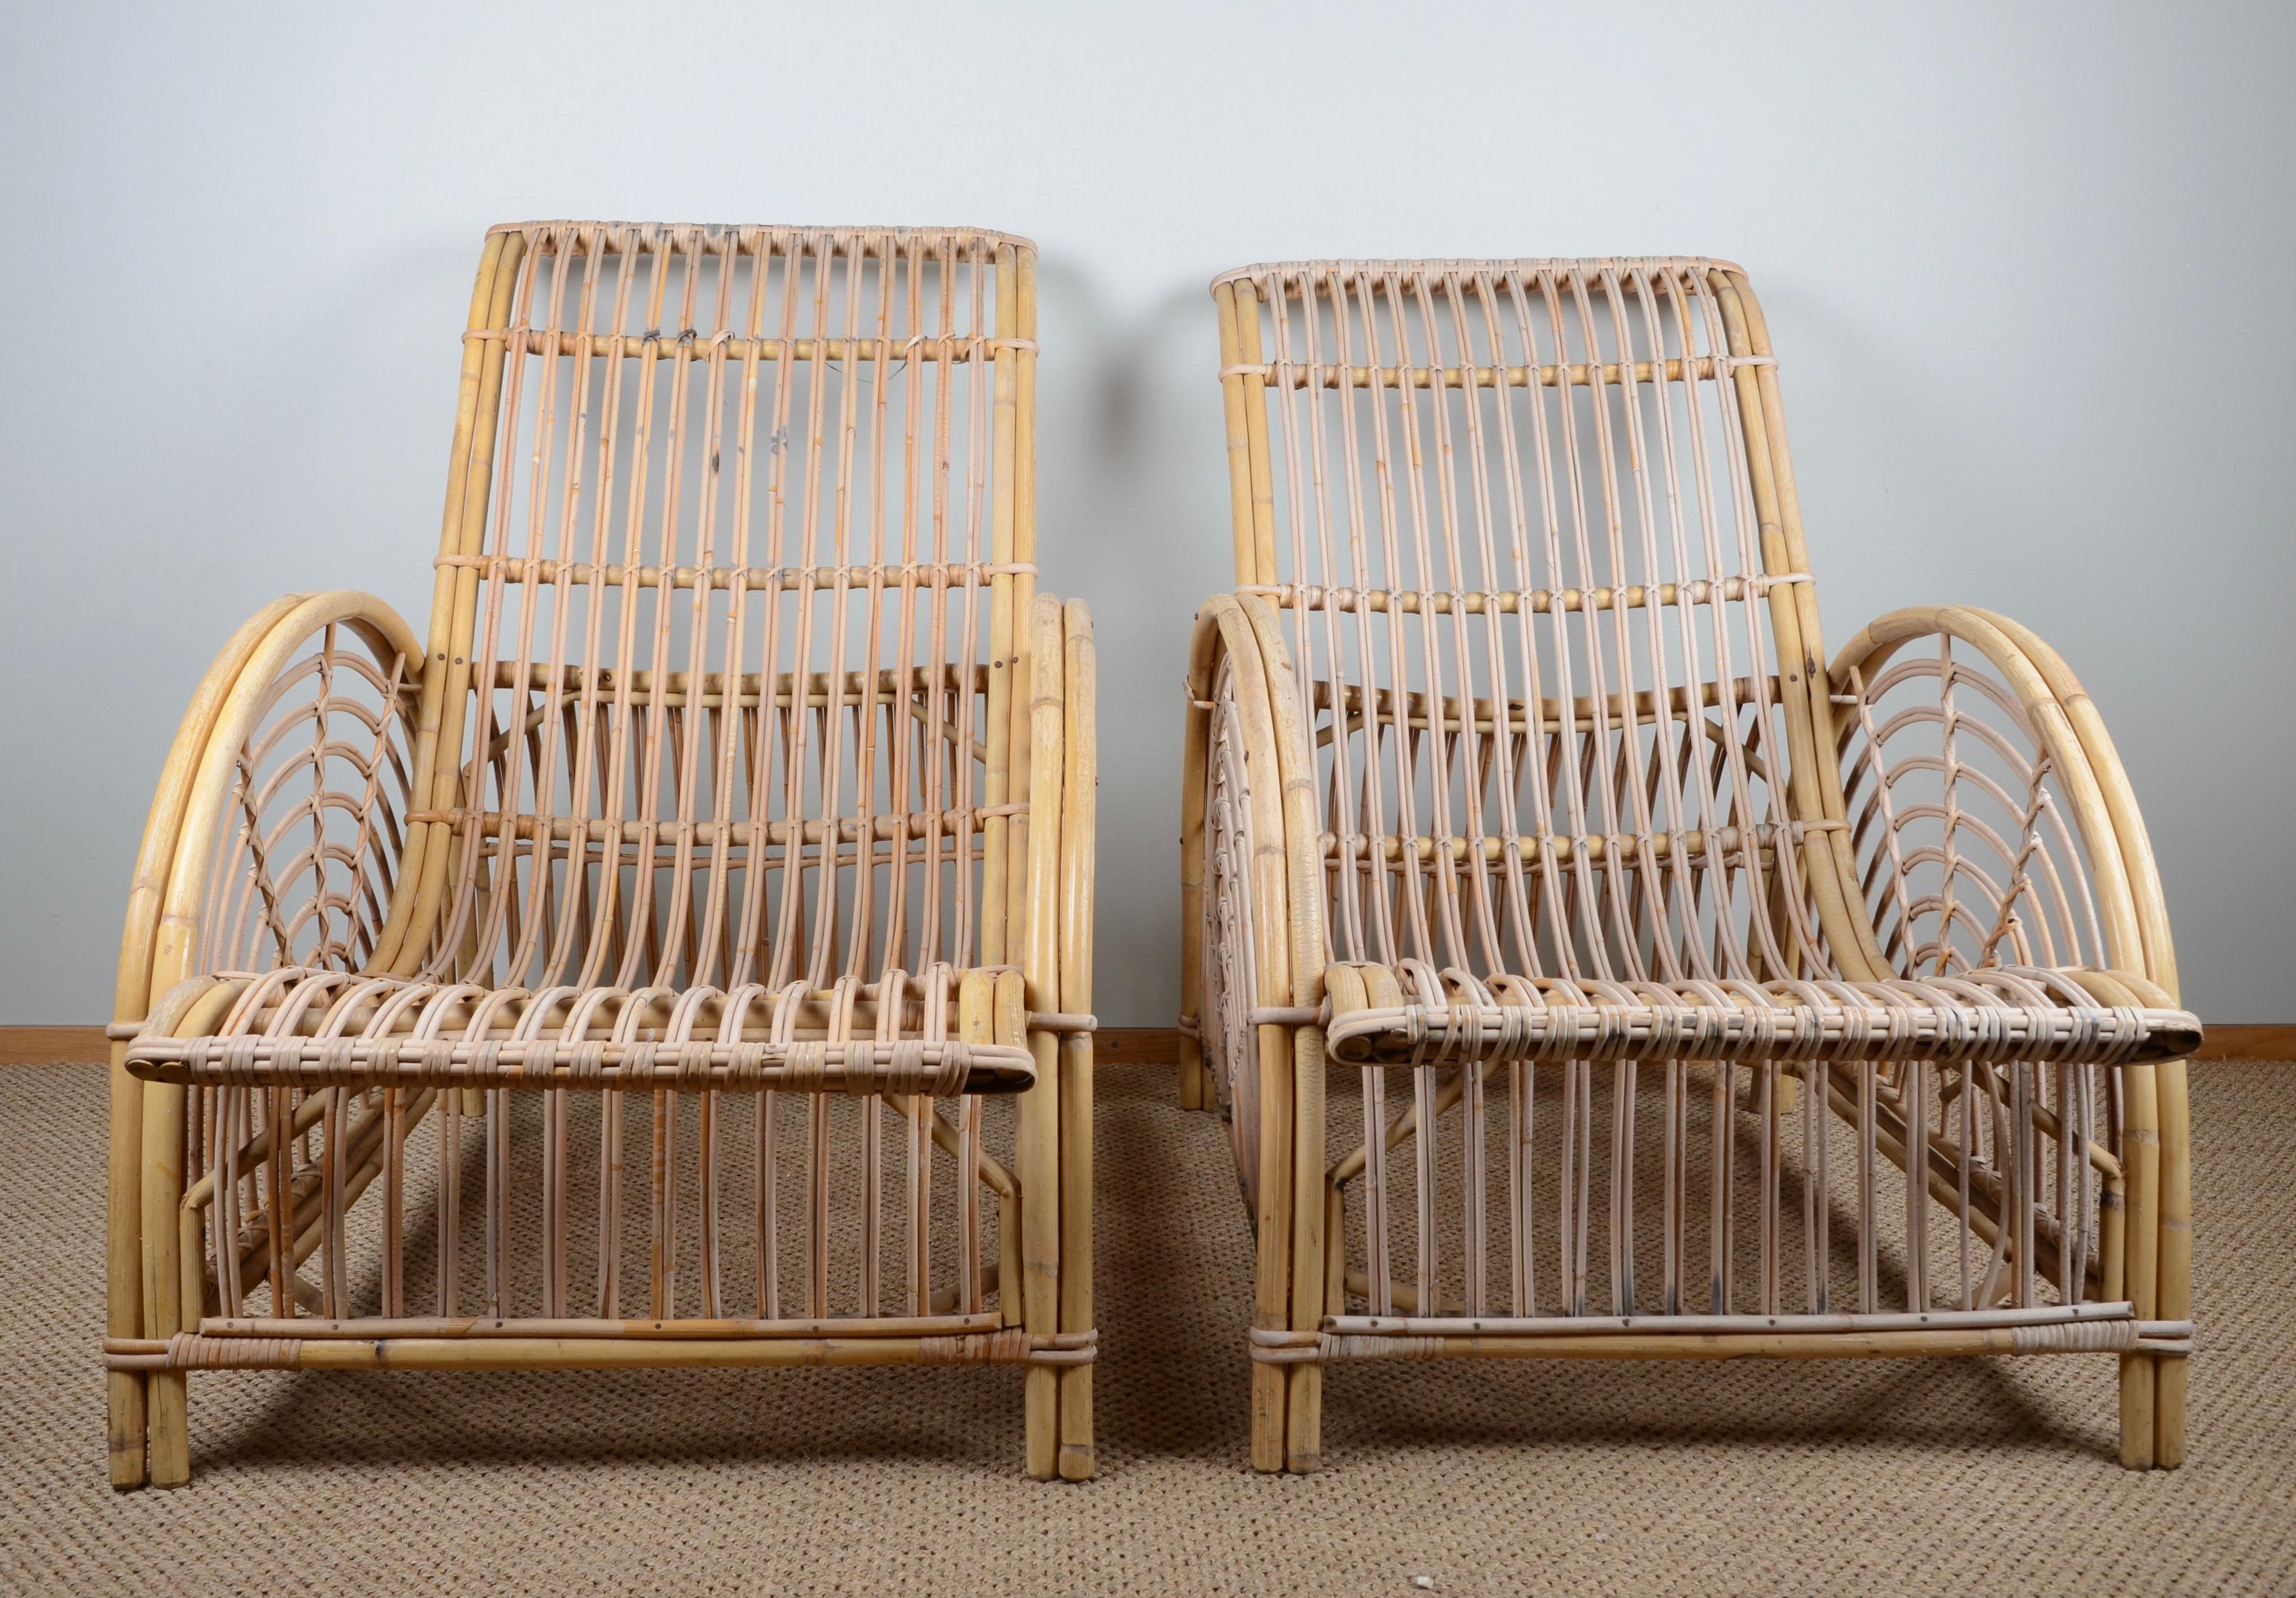 A pair of rattan chairs, model Paris / AJ-11. Designed in 1925 by Arne Jacobsen, his first furniture design. These are manufactured circa 1960s.

 